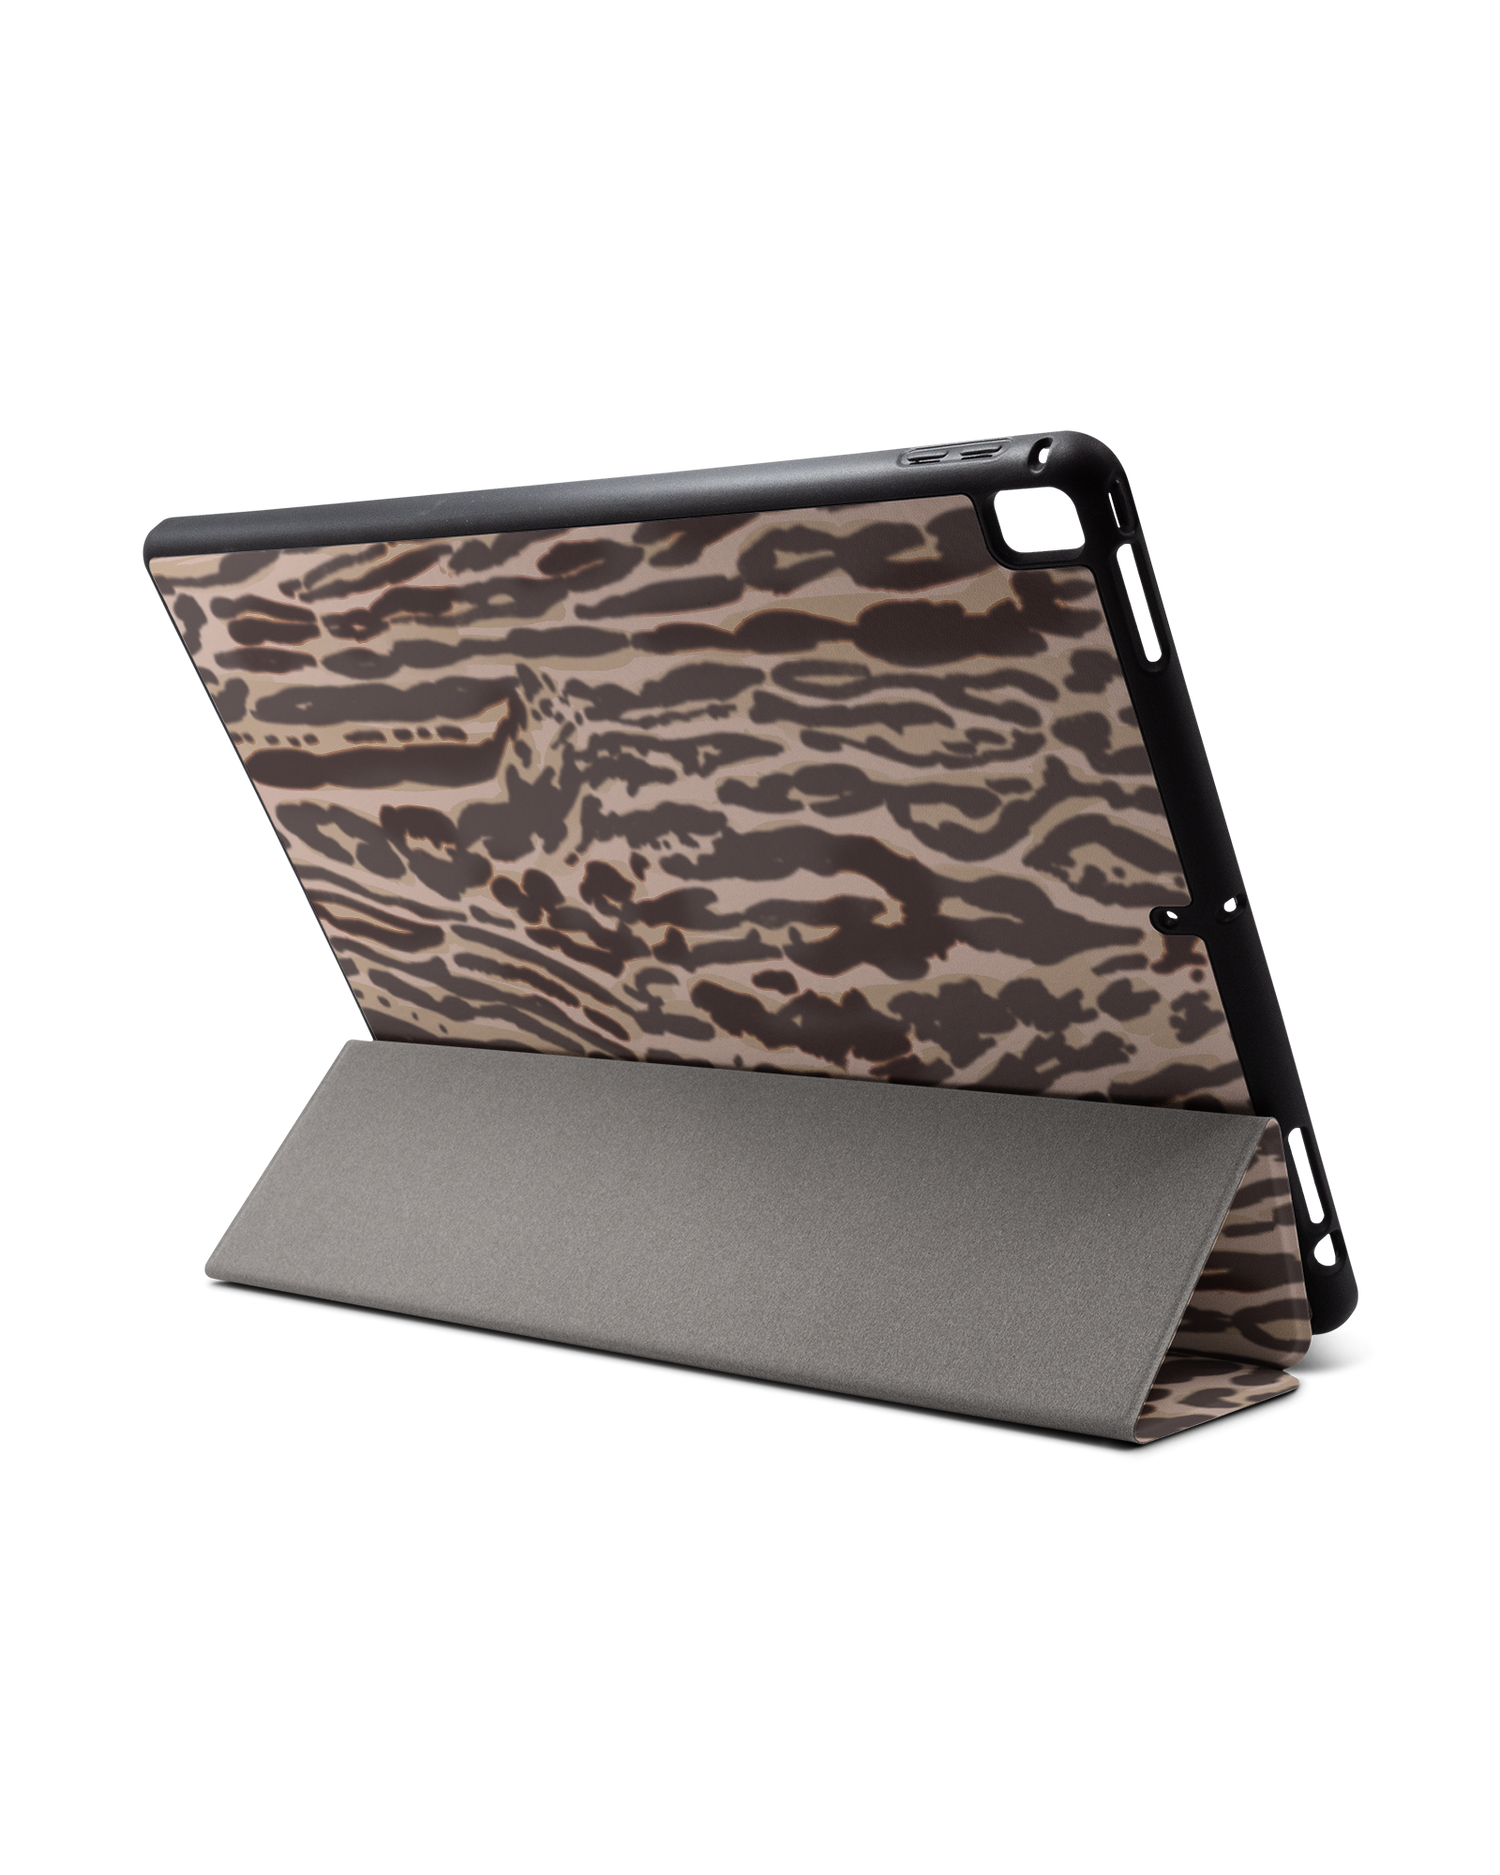 Animal Skin Tough Love iPad Case with Pencil Holder for Apple iPad Pro 2 12.9